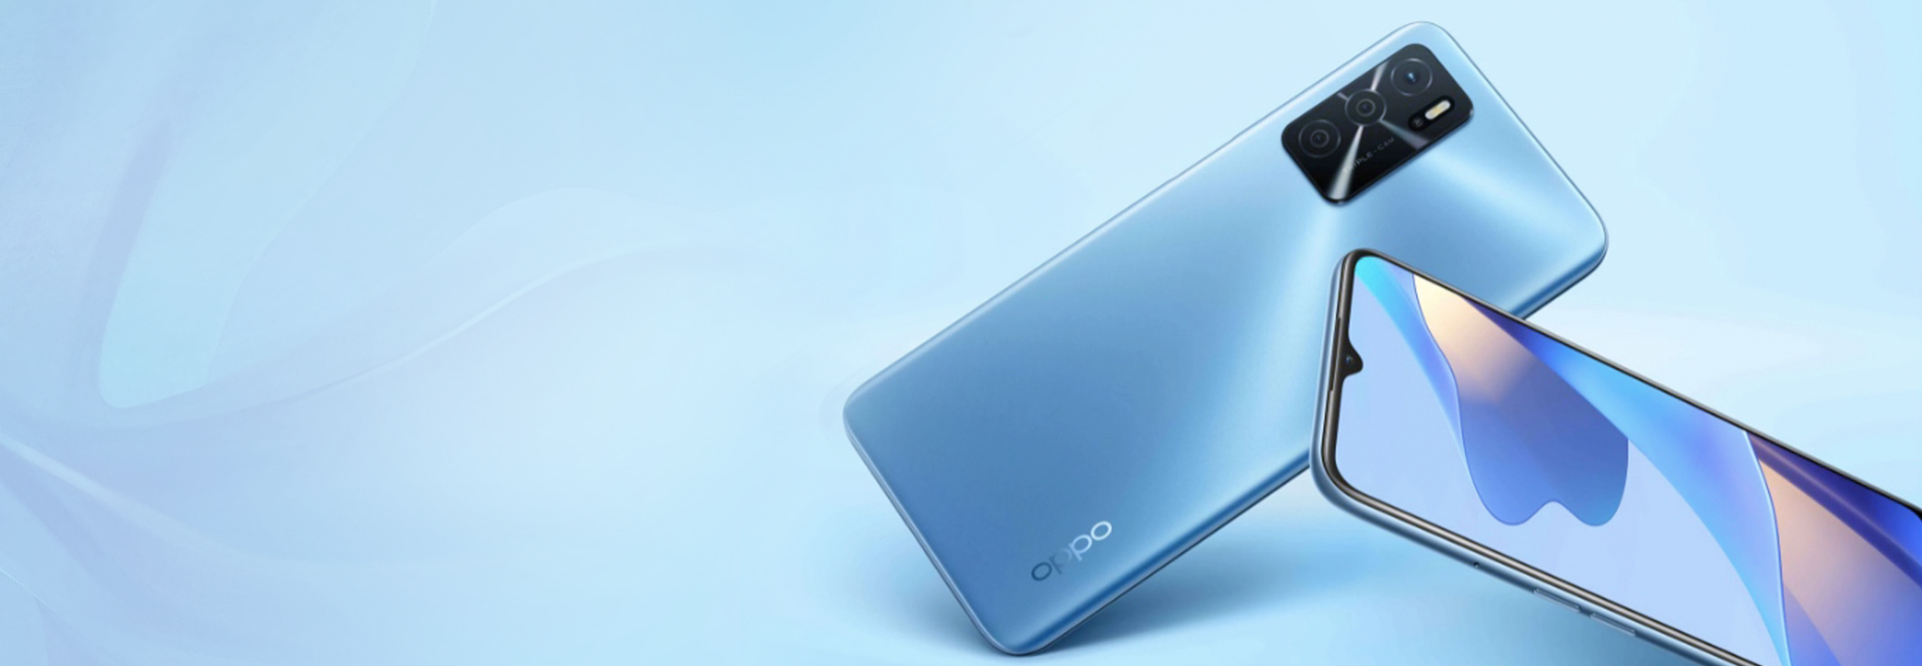 Meet OPPO, the fastest-growing smartphone brand in the world